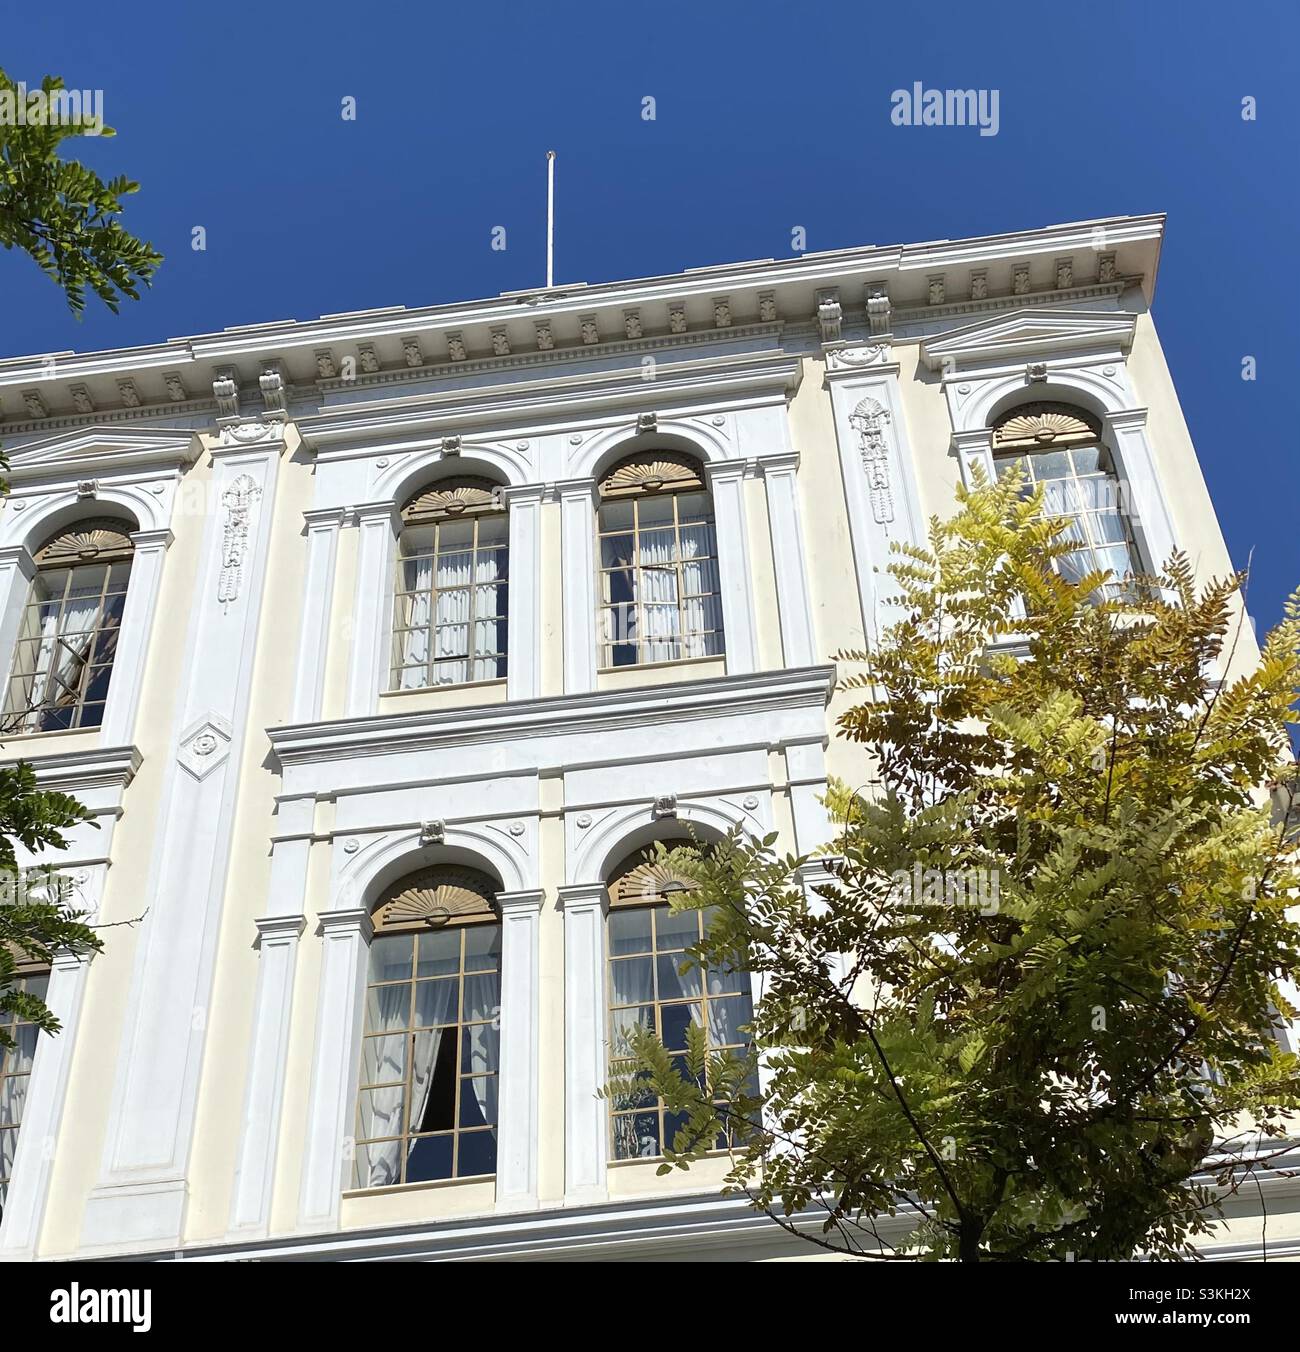 Restored, decorative and elegant neo-classical building in Mitropoleos Street, central Athens, Greece. Despite earlier city-centre demolitions, there are many such buildings awaiting restoration. Stock Photo